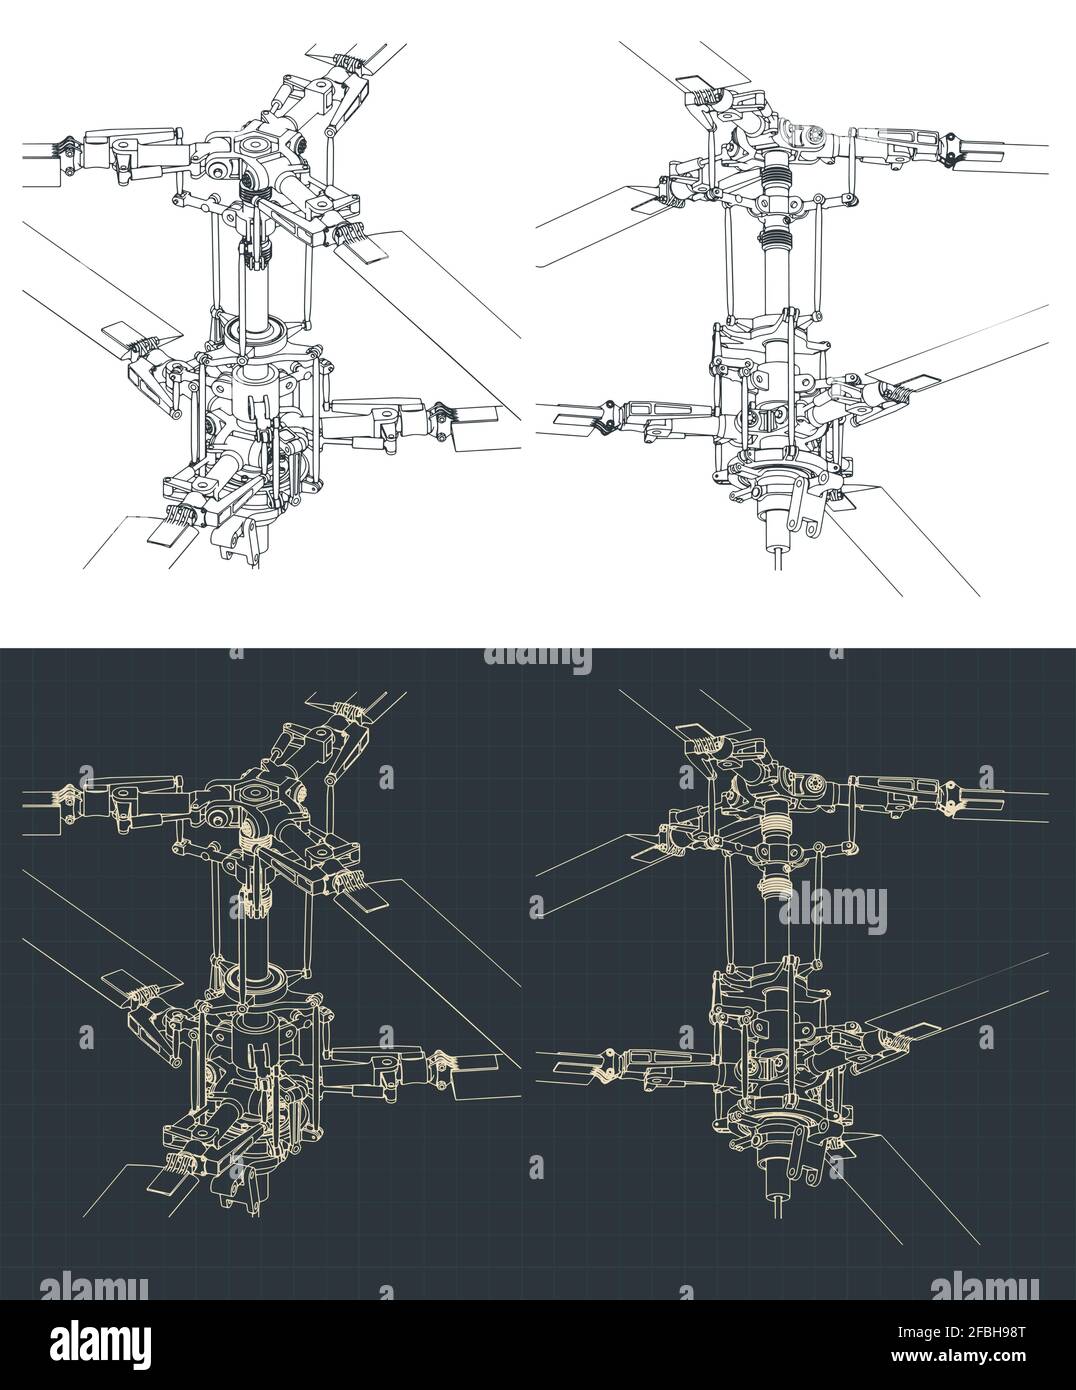 Stylized vector illustrations of mechanism of helicopter coaxial main rotor drawings Stock Vector